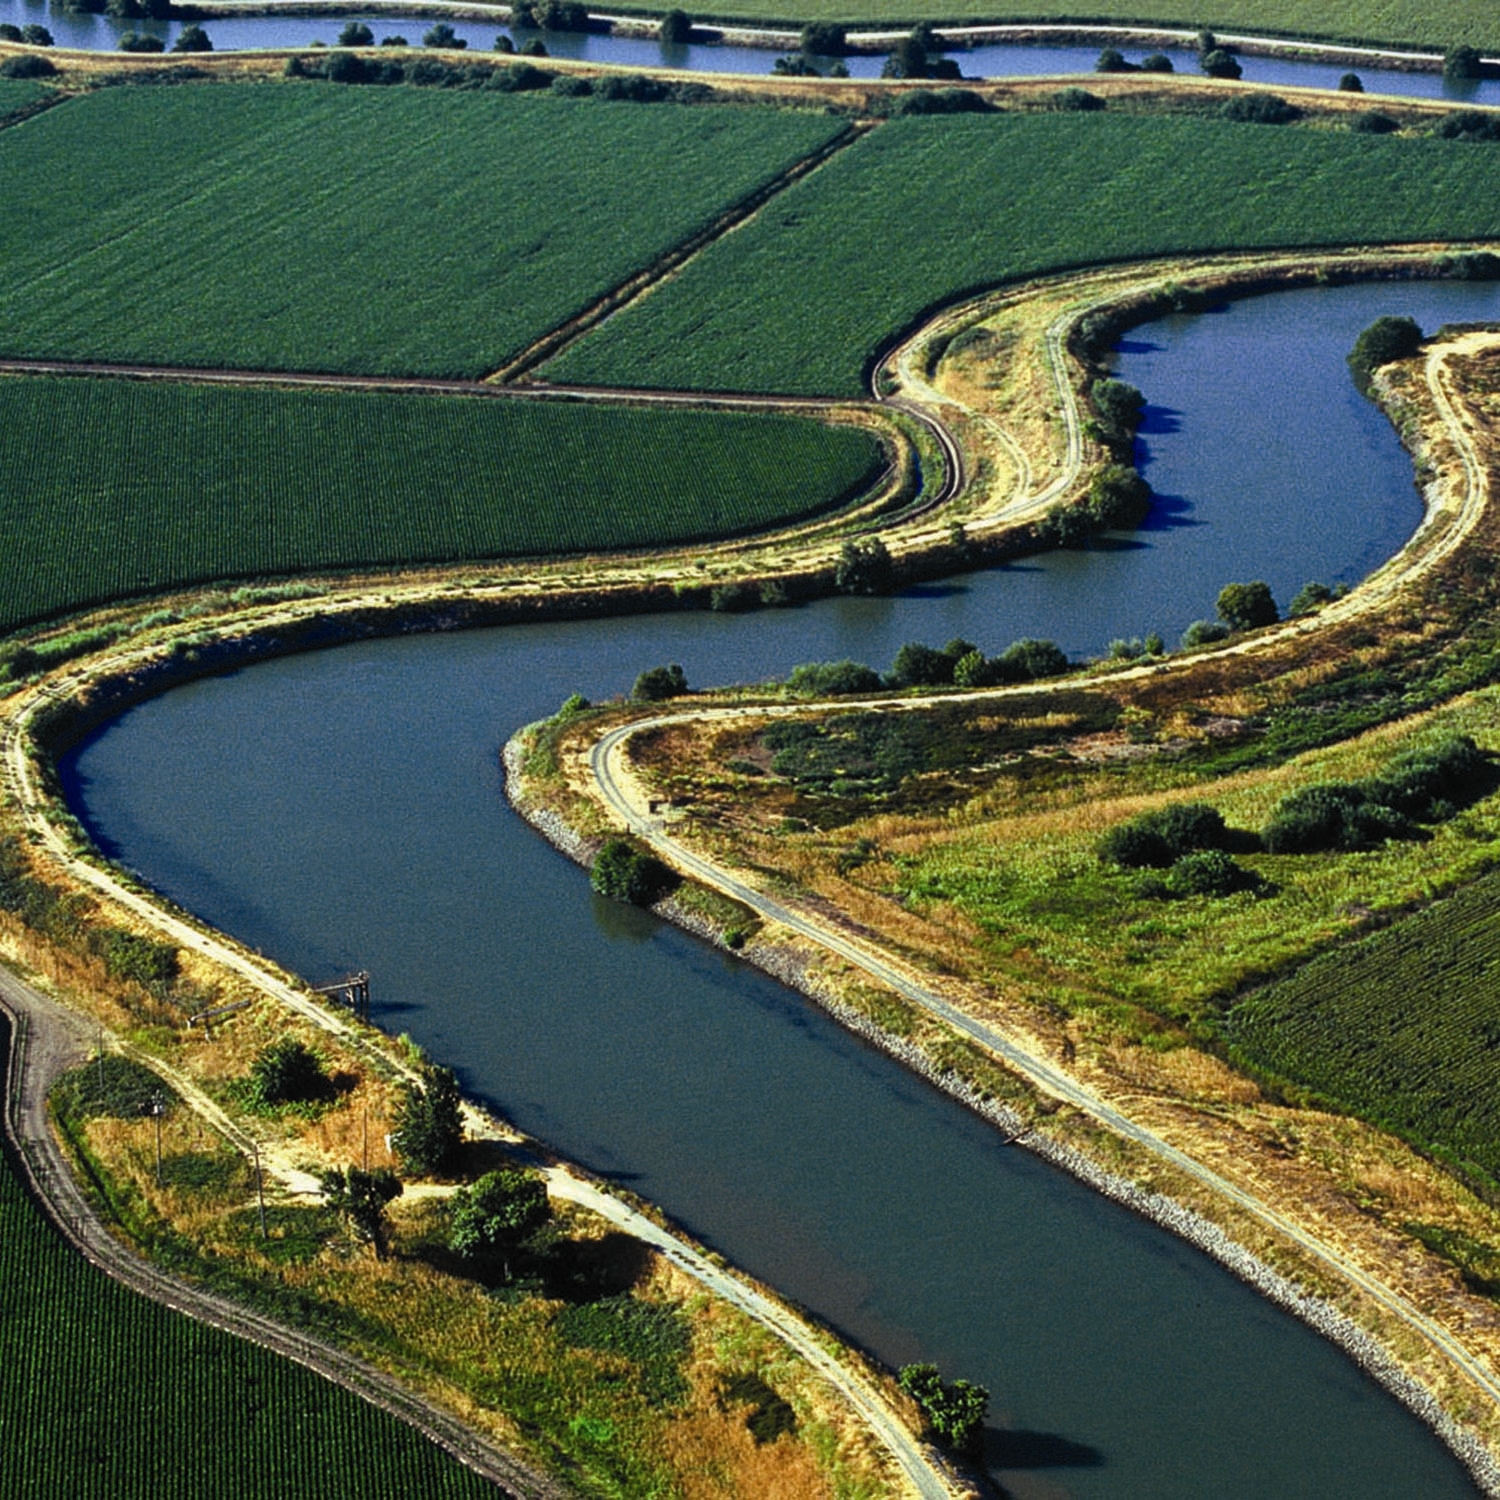 Bird's eye view of Delta canal and green farmlands